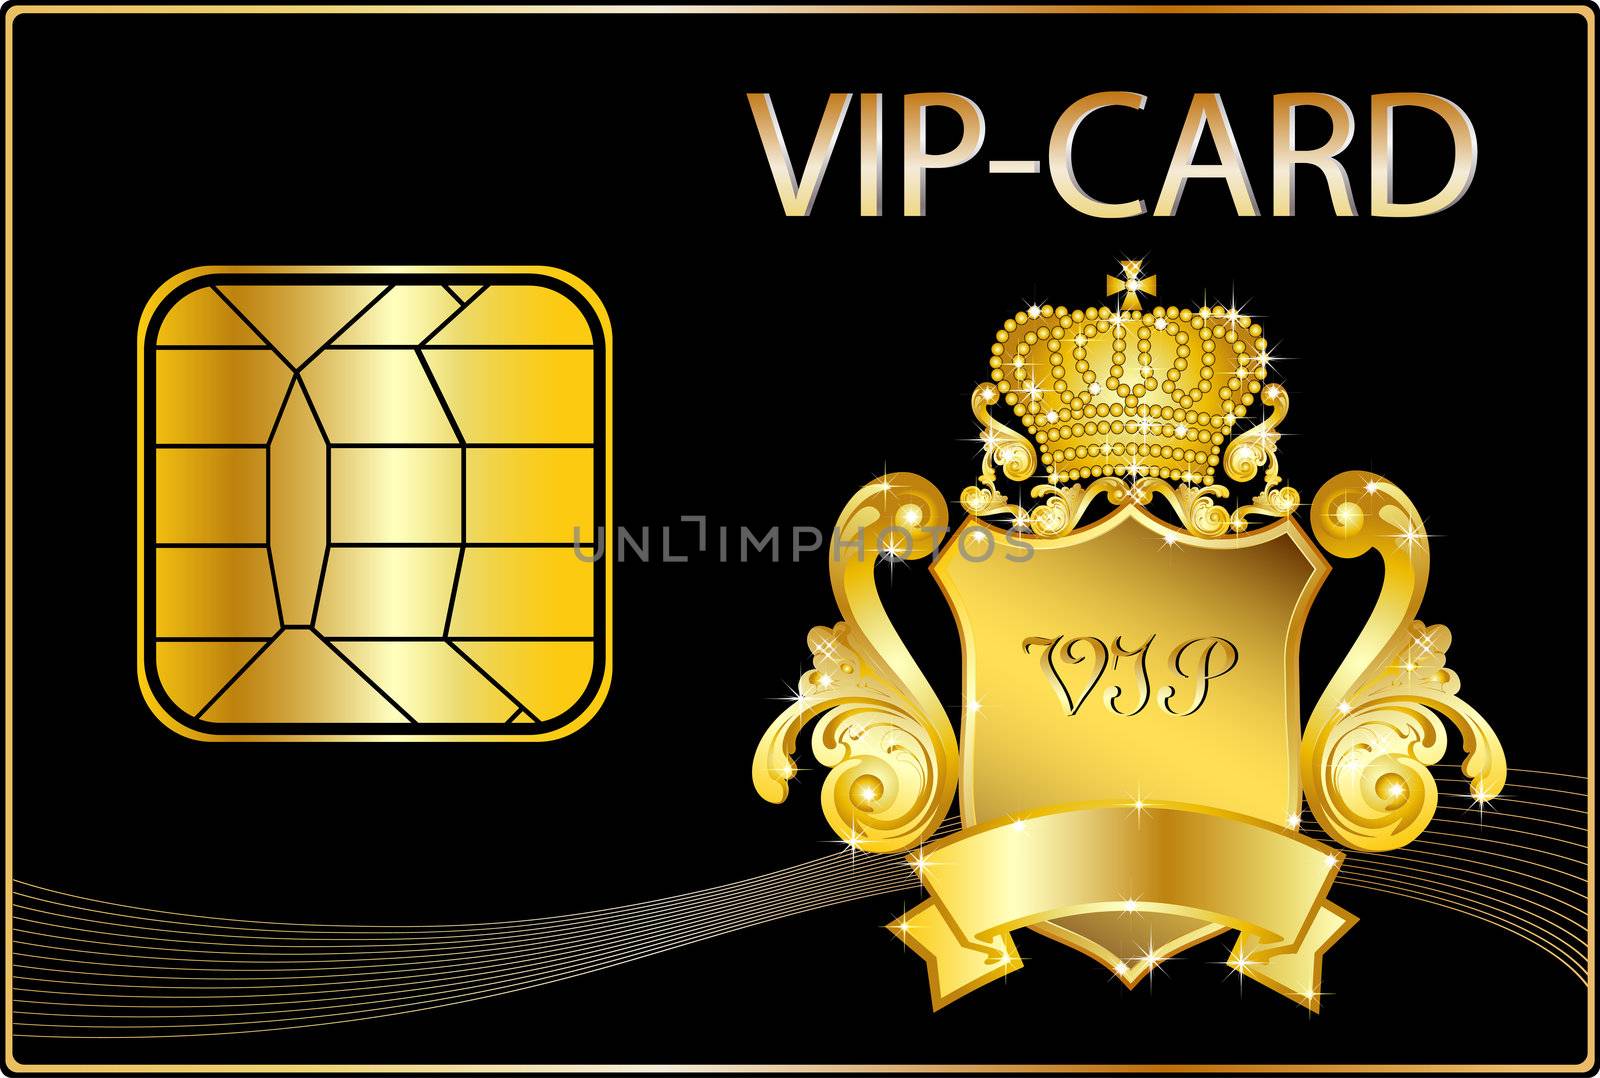 VIP Card wit a golden crest by peromarketing